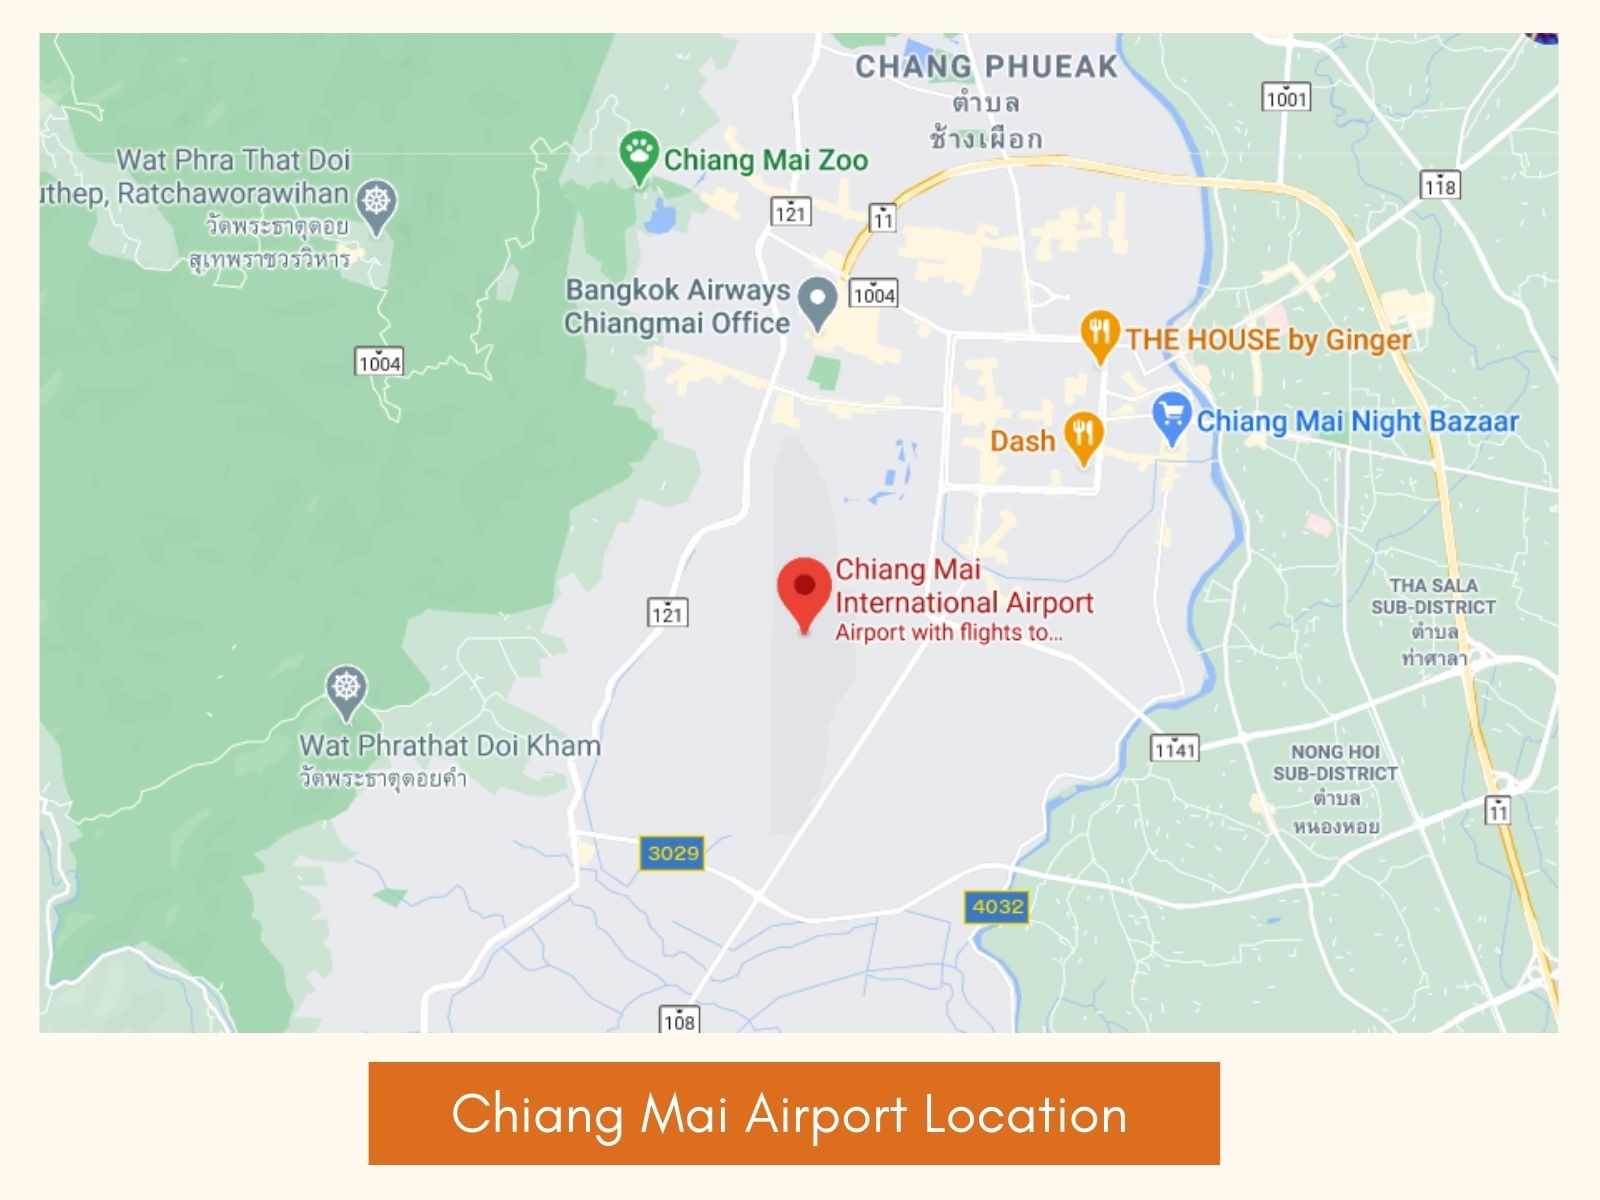 Chiang Mai Airport location